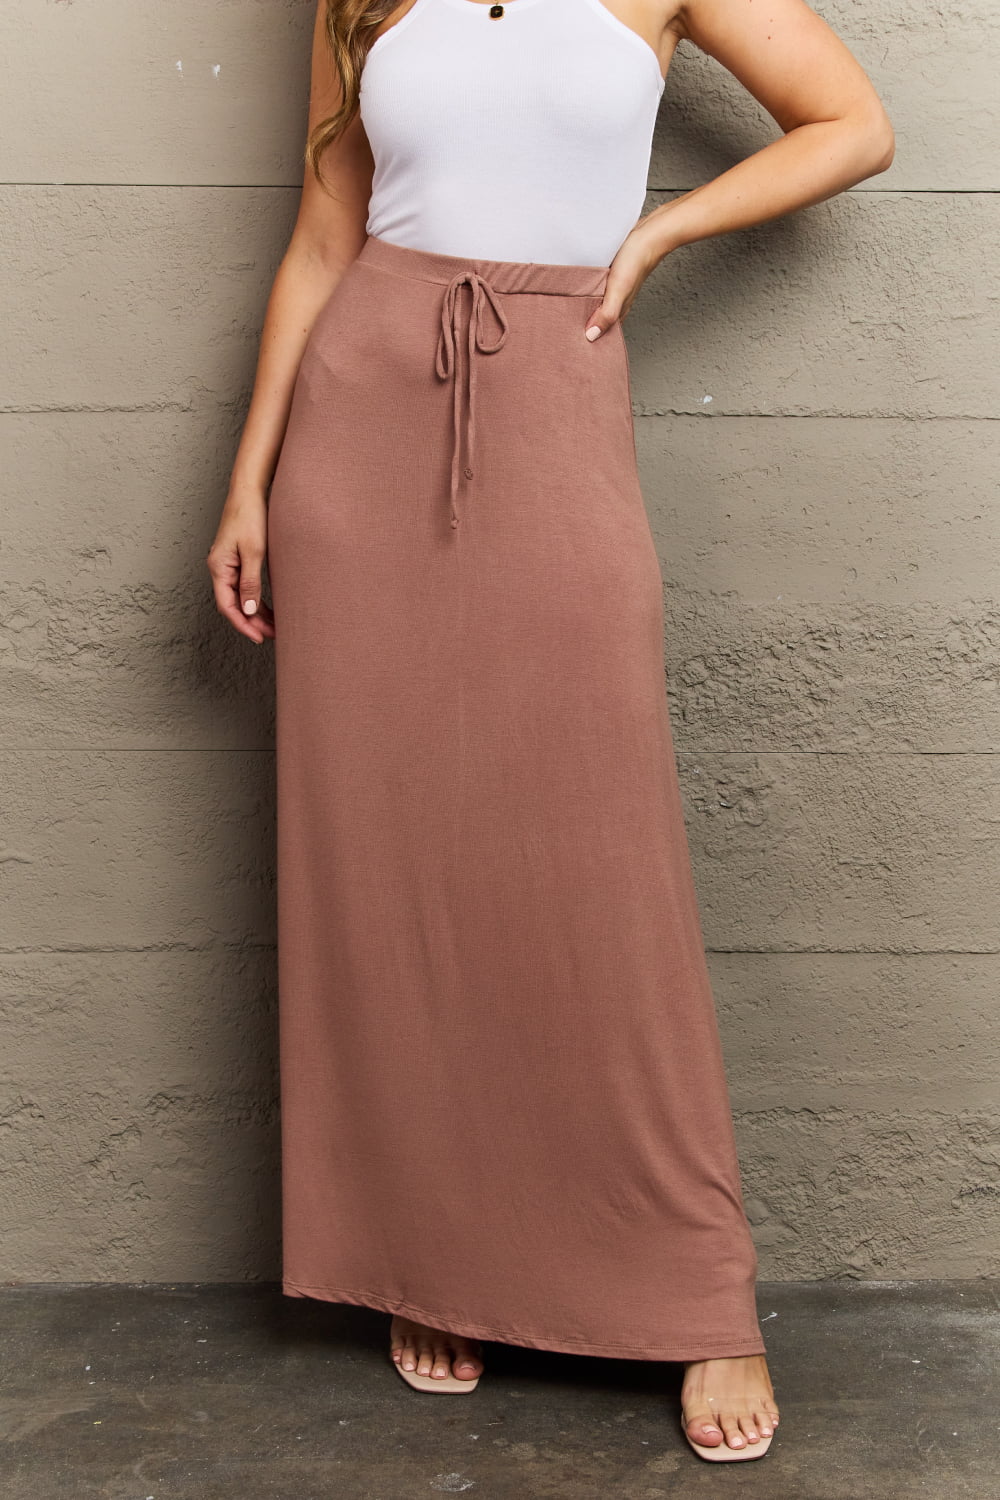 Culture Code For The Day Flare Maxi Skirt